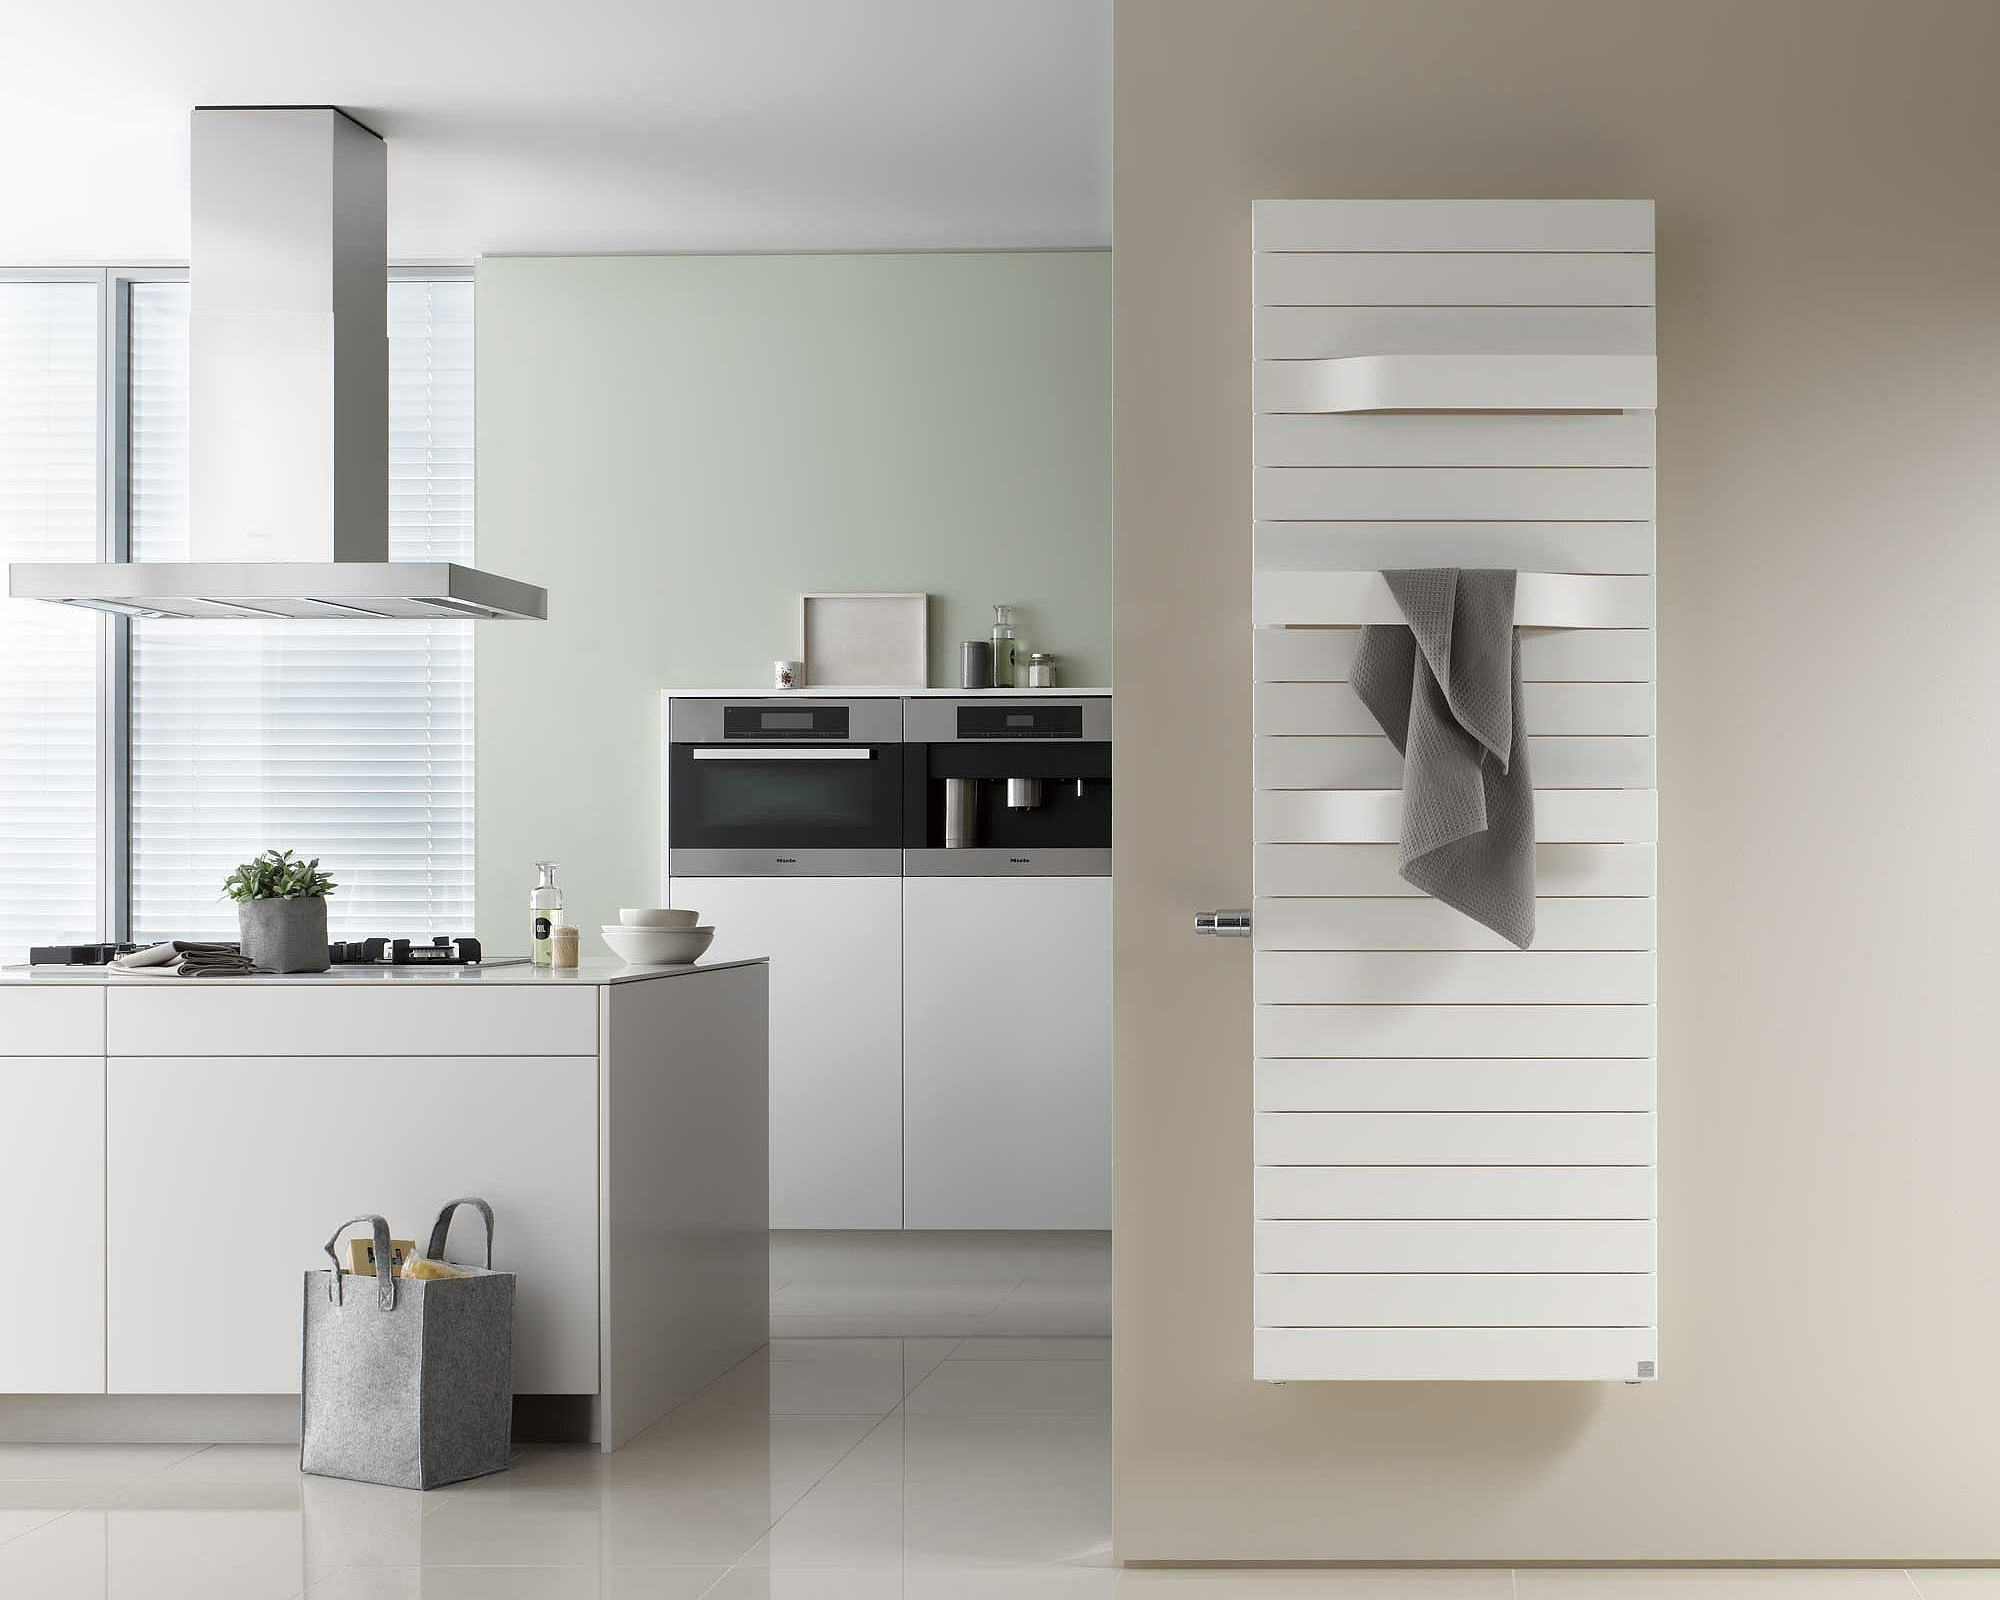 Kermi Tabeo design and bathroom radiators with clear lines and characteristic grooves.